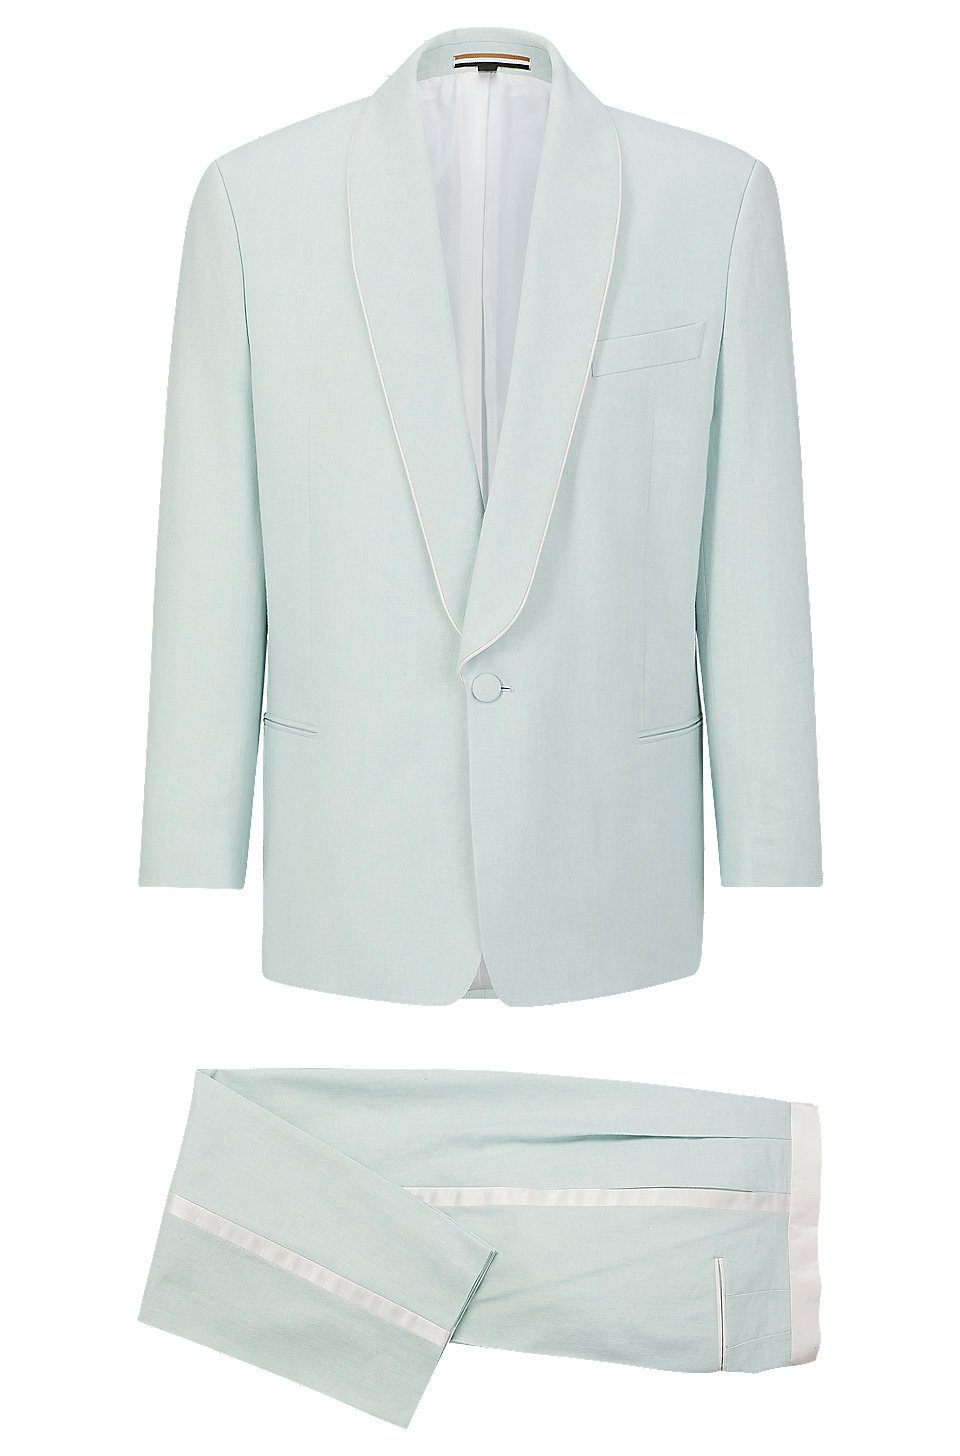 BOSS - Tuxedo suit in linen and cotton